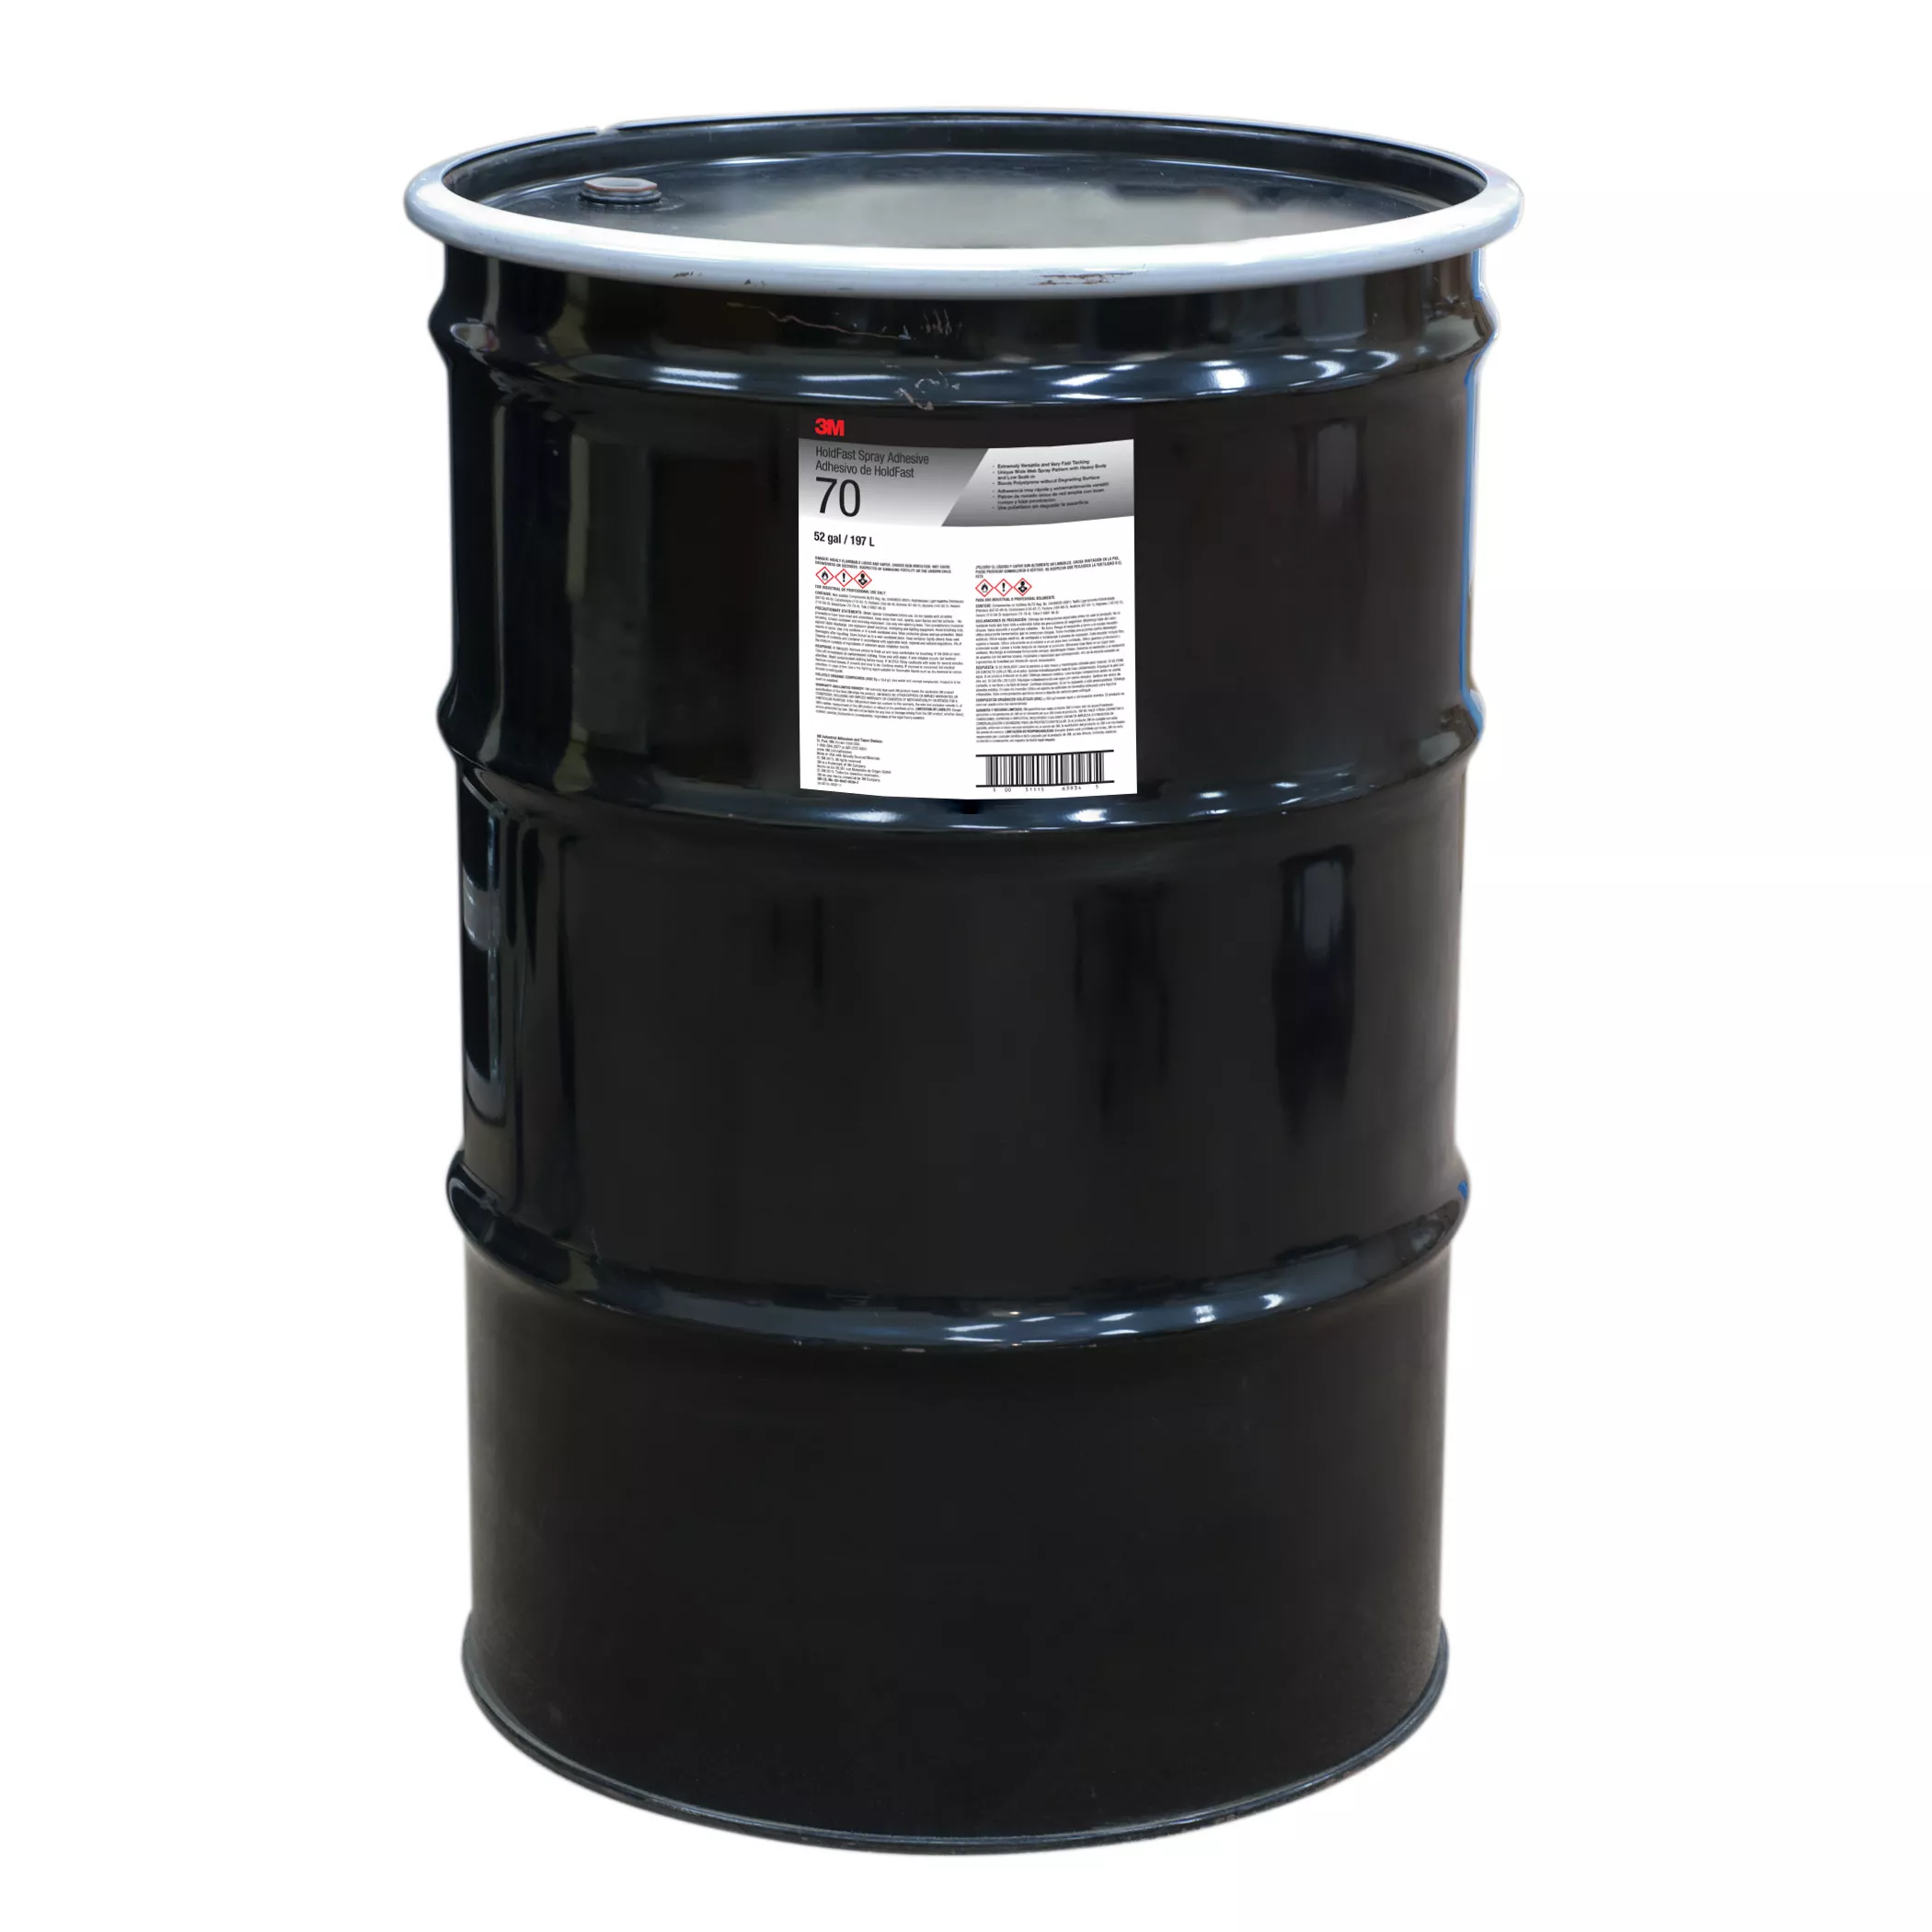 3M™ HoldFast 70 Adhesive, Clear, 55 Gallon Metal Closed Head (52 Gallon
Net), Drum